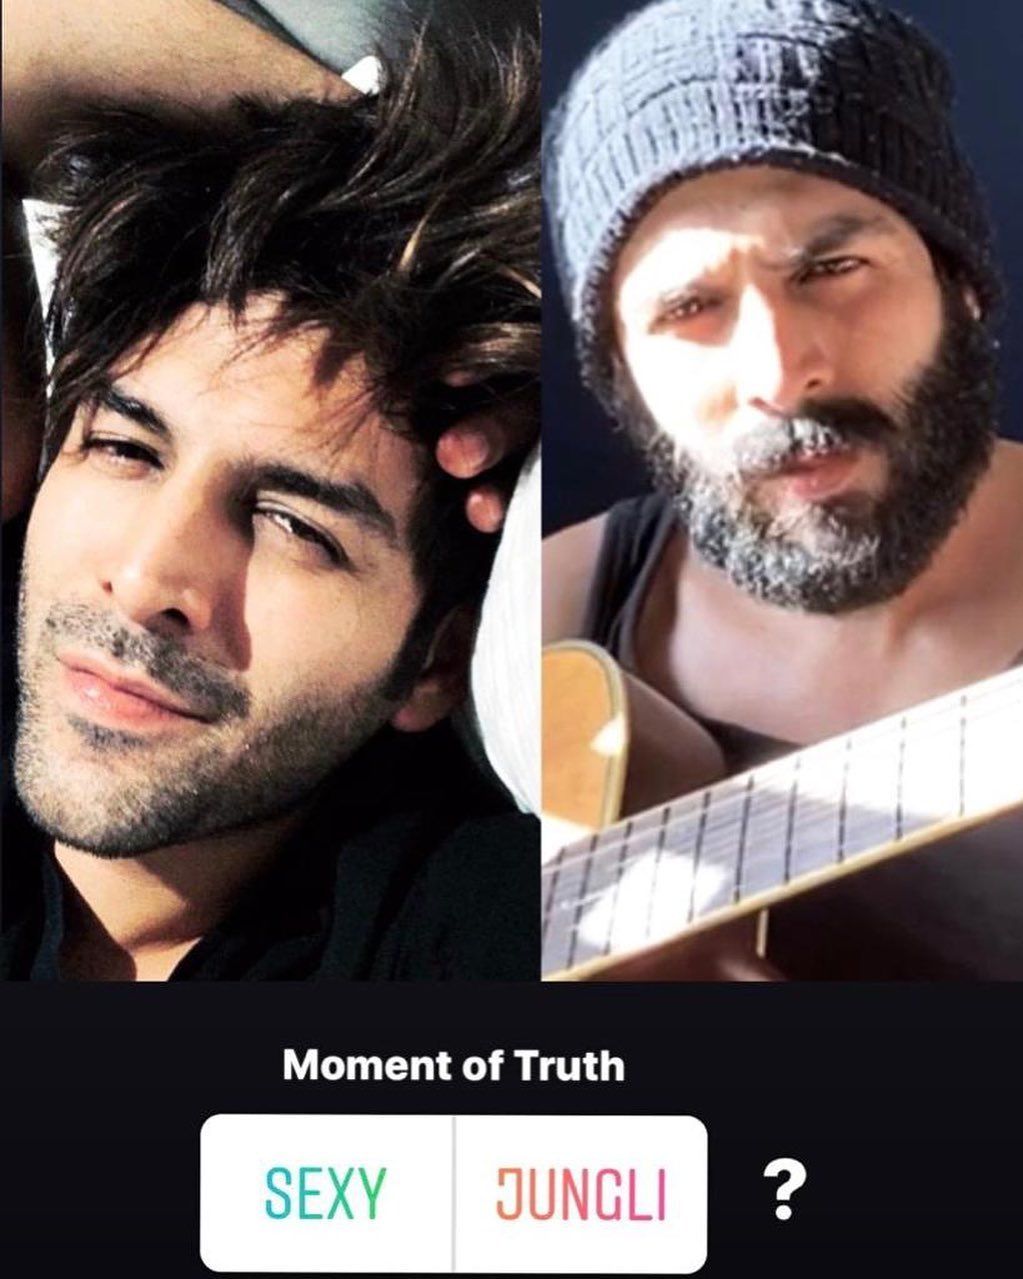 A Confused Kartik Aaryan Asks Fans If He Should Keep His New Bearded Look, Runs A Poll To Get Answers